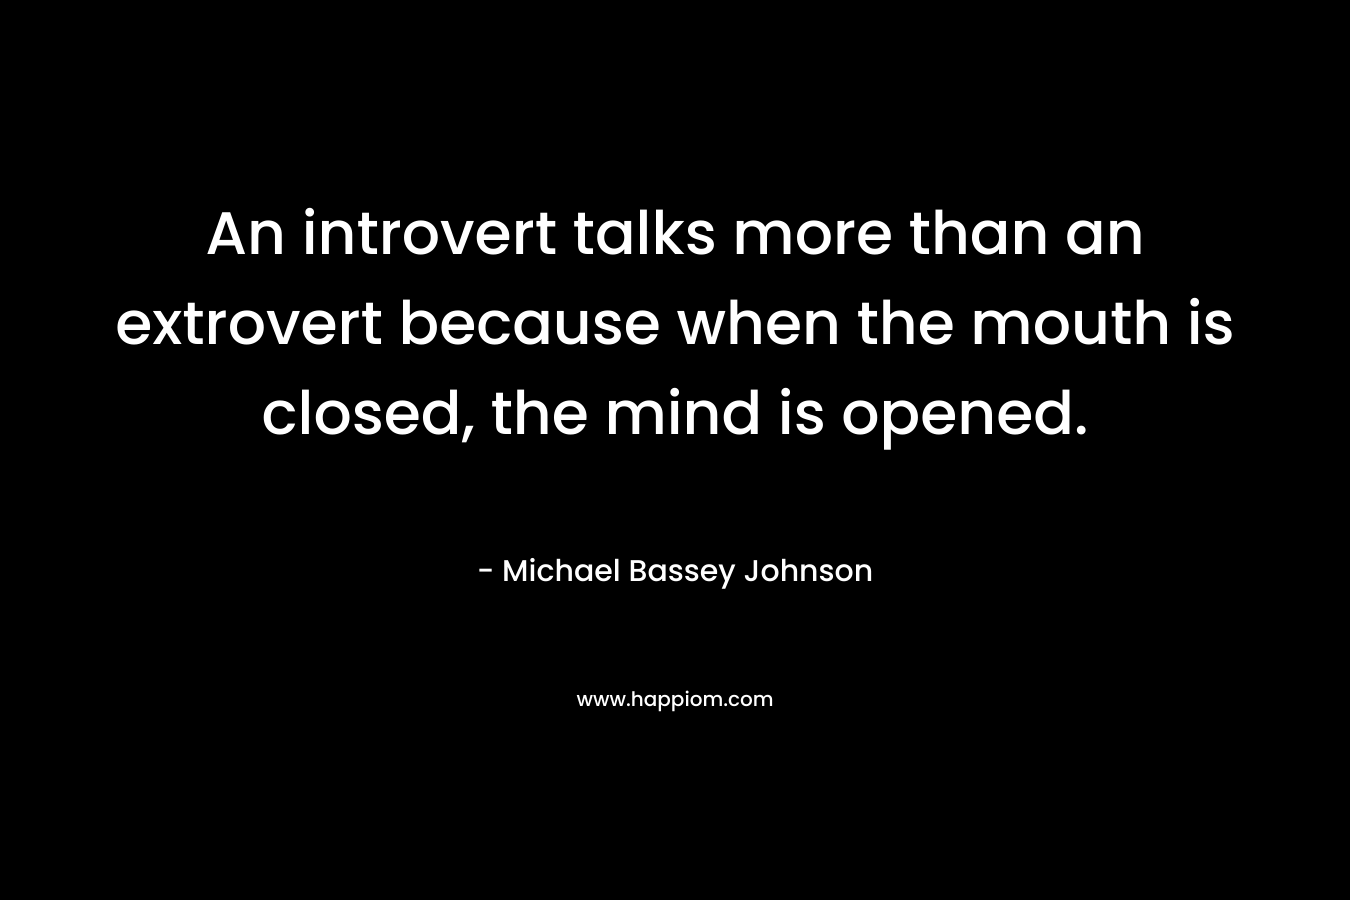 An introvert talks more than an extrovert because when the mouth is closed, the mind is opened. – Michael Bassey Johnson